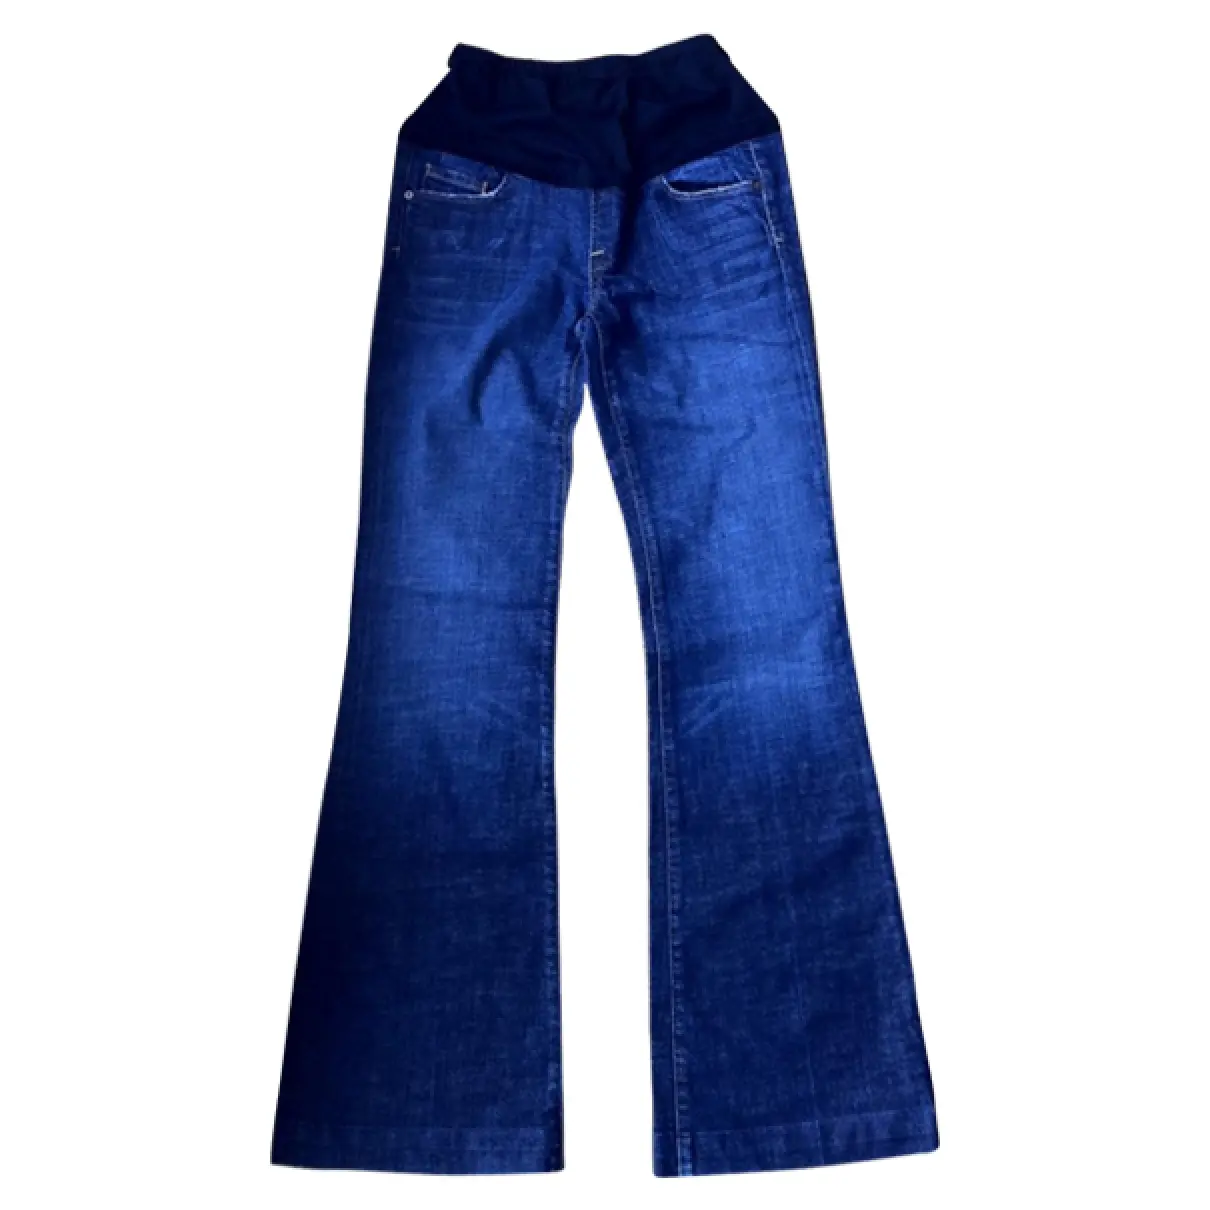 Blue Cotton/elasthane Jeans Citizens Of Humanity